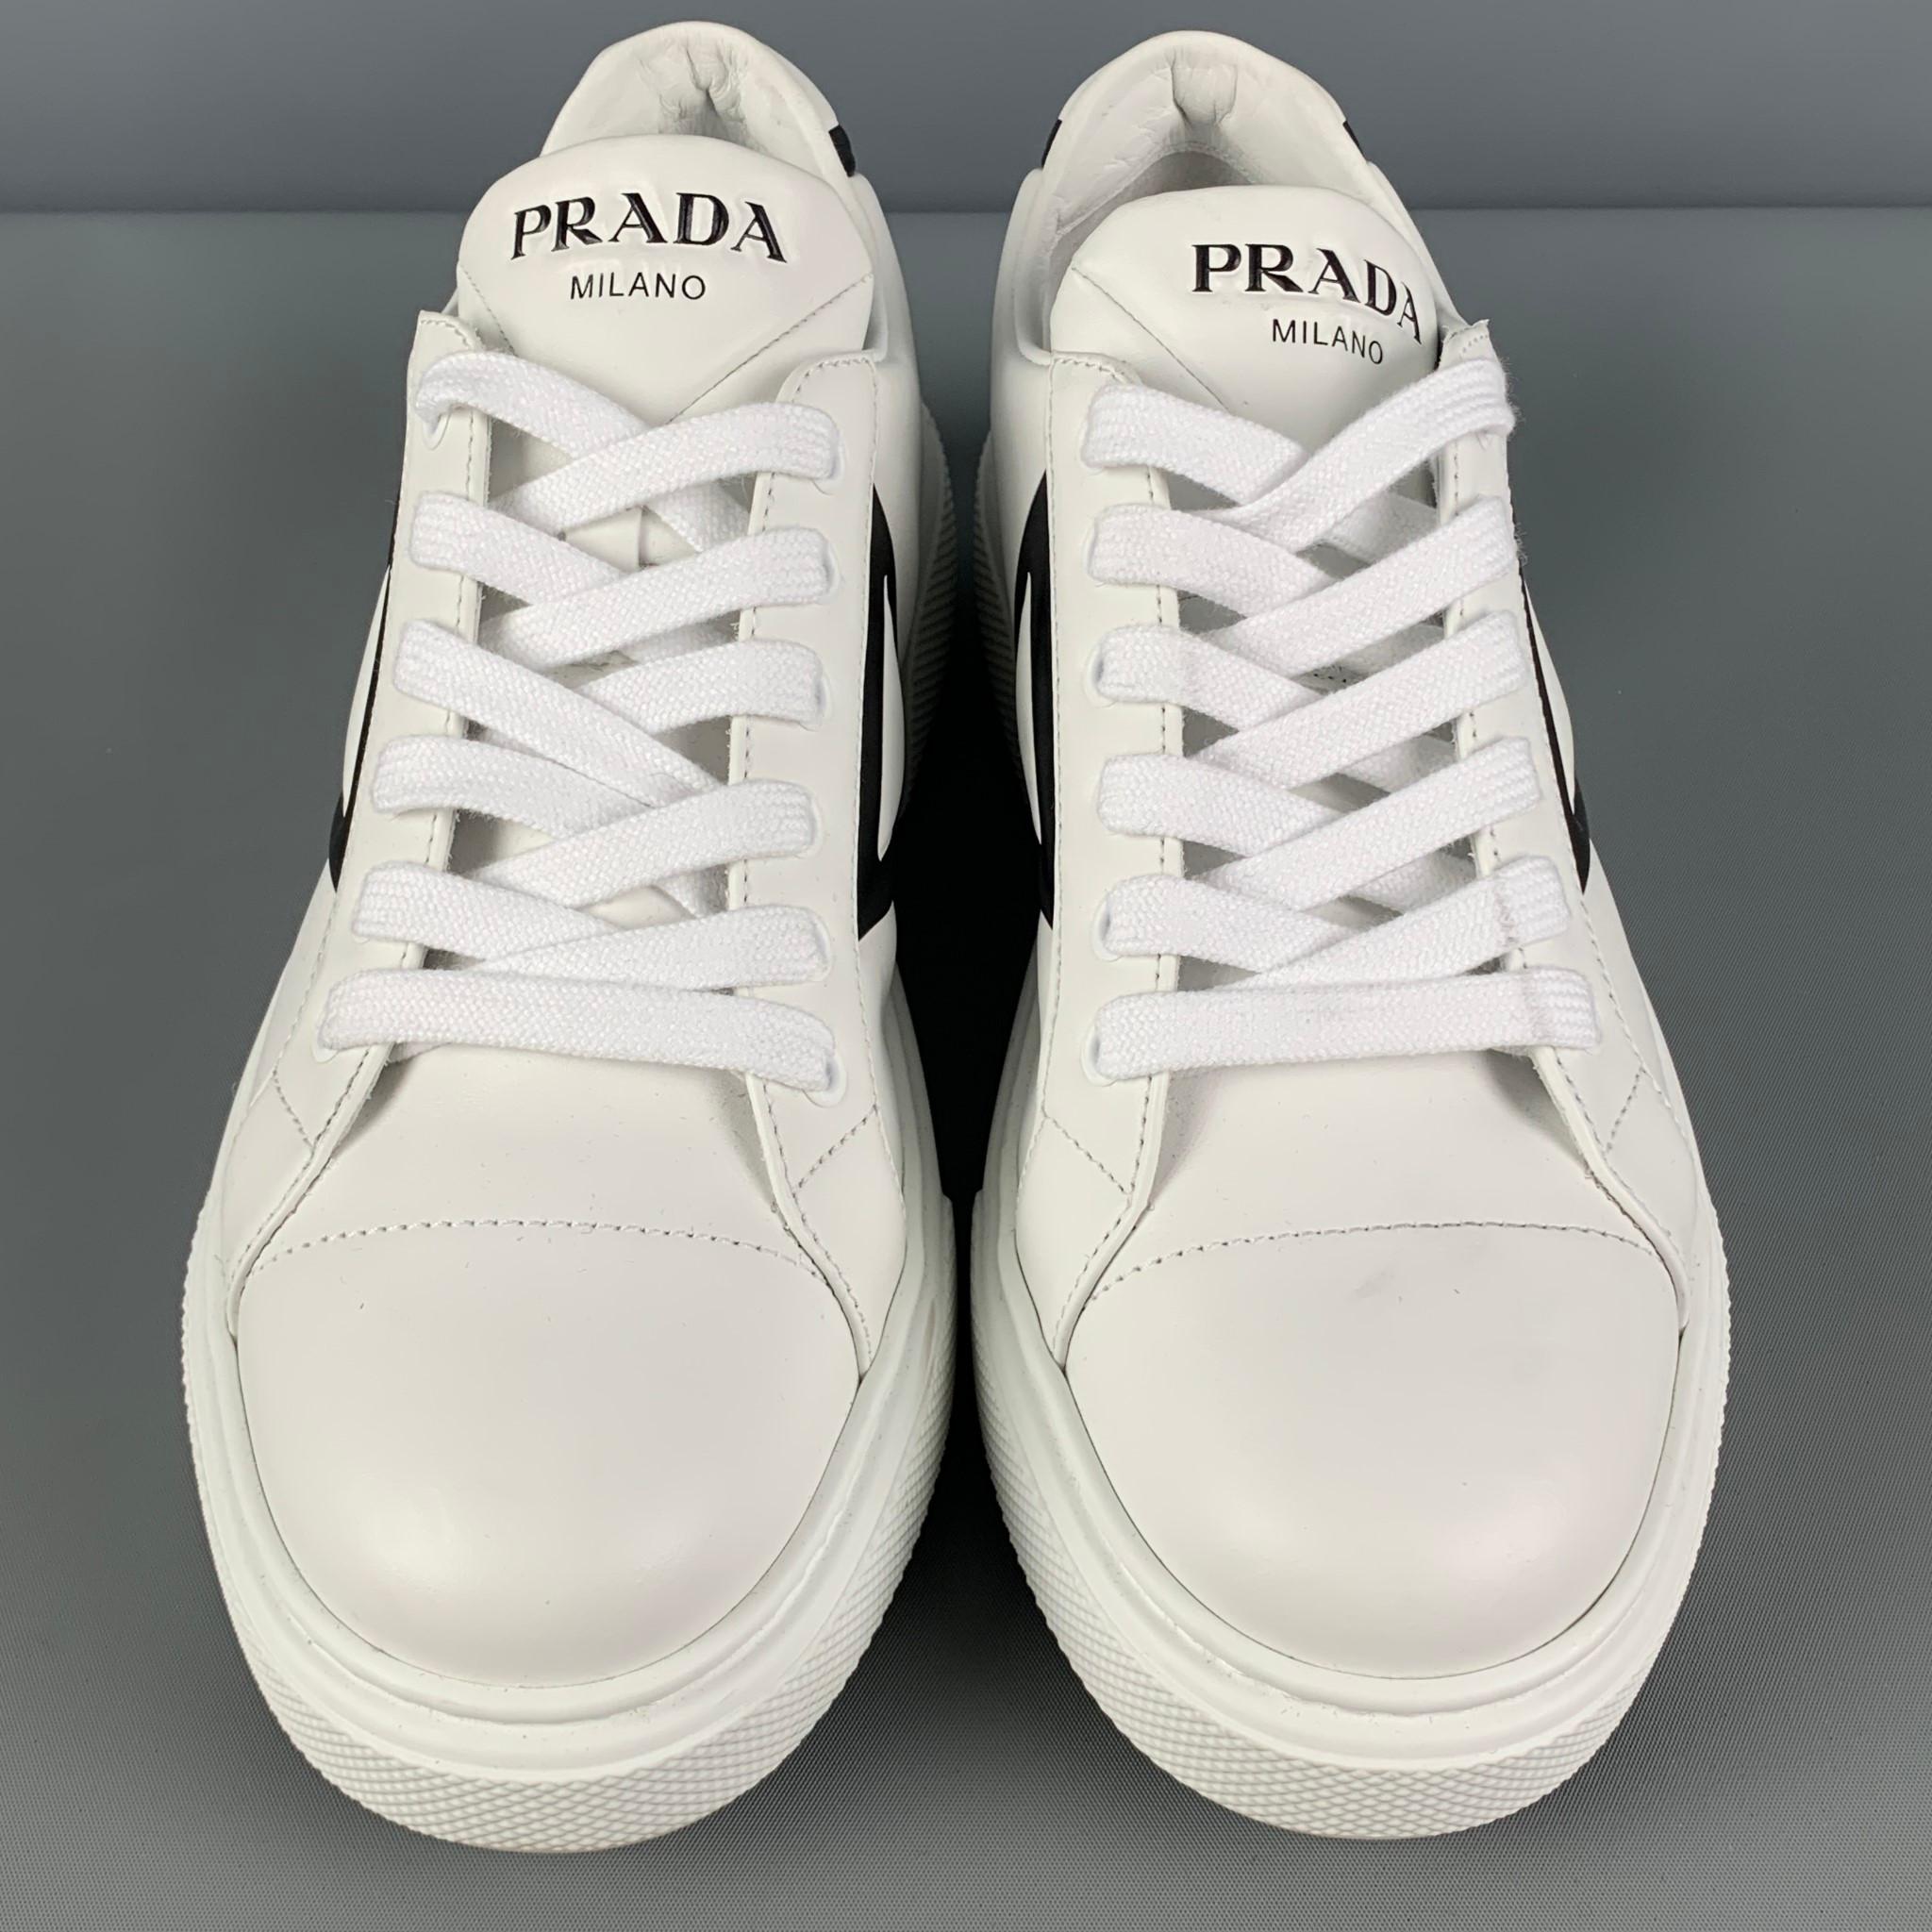 Women's PRADA Size 7.5 White Leather Lace Up Sneakers